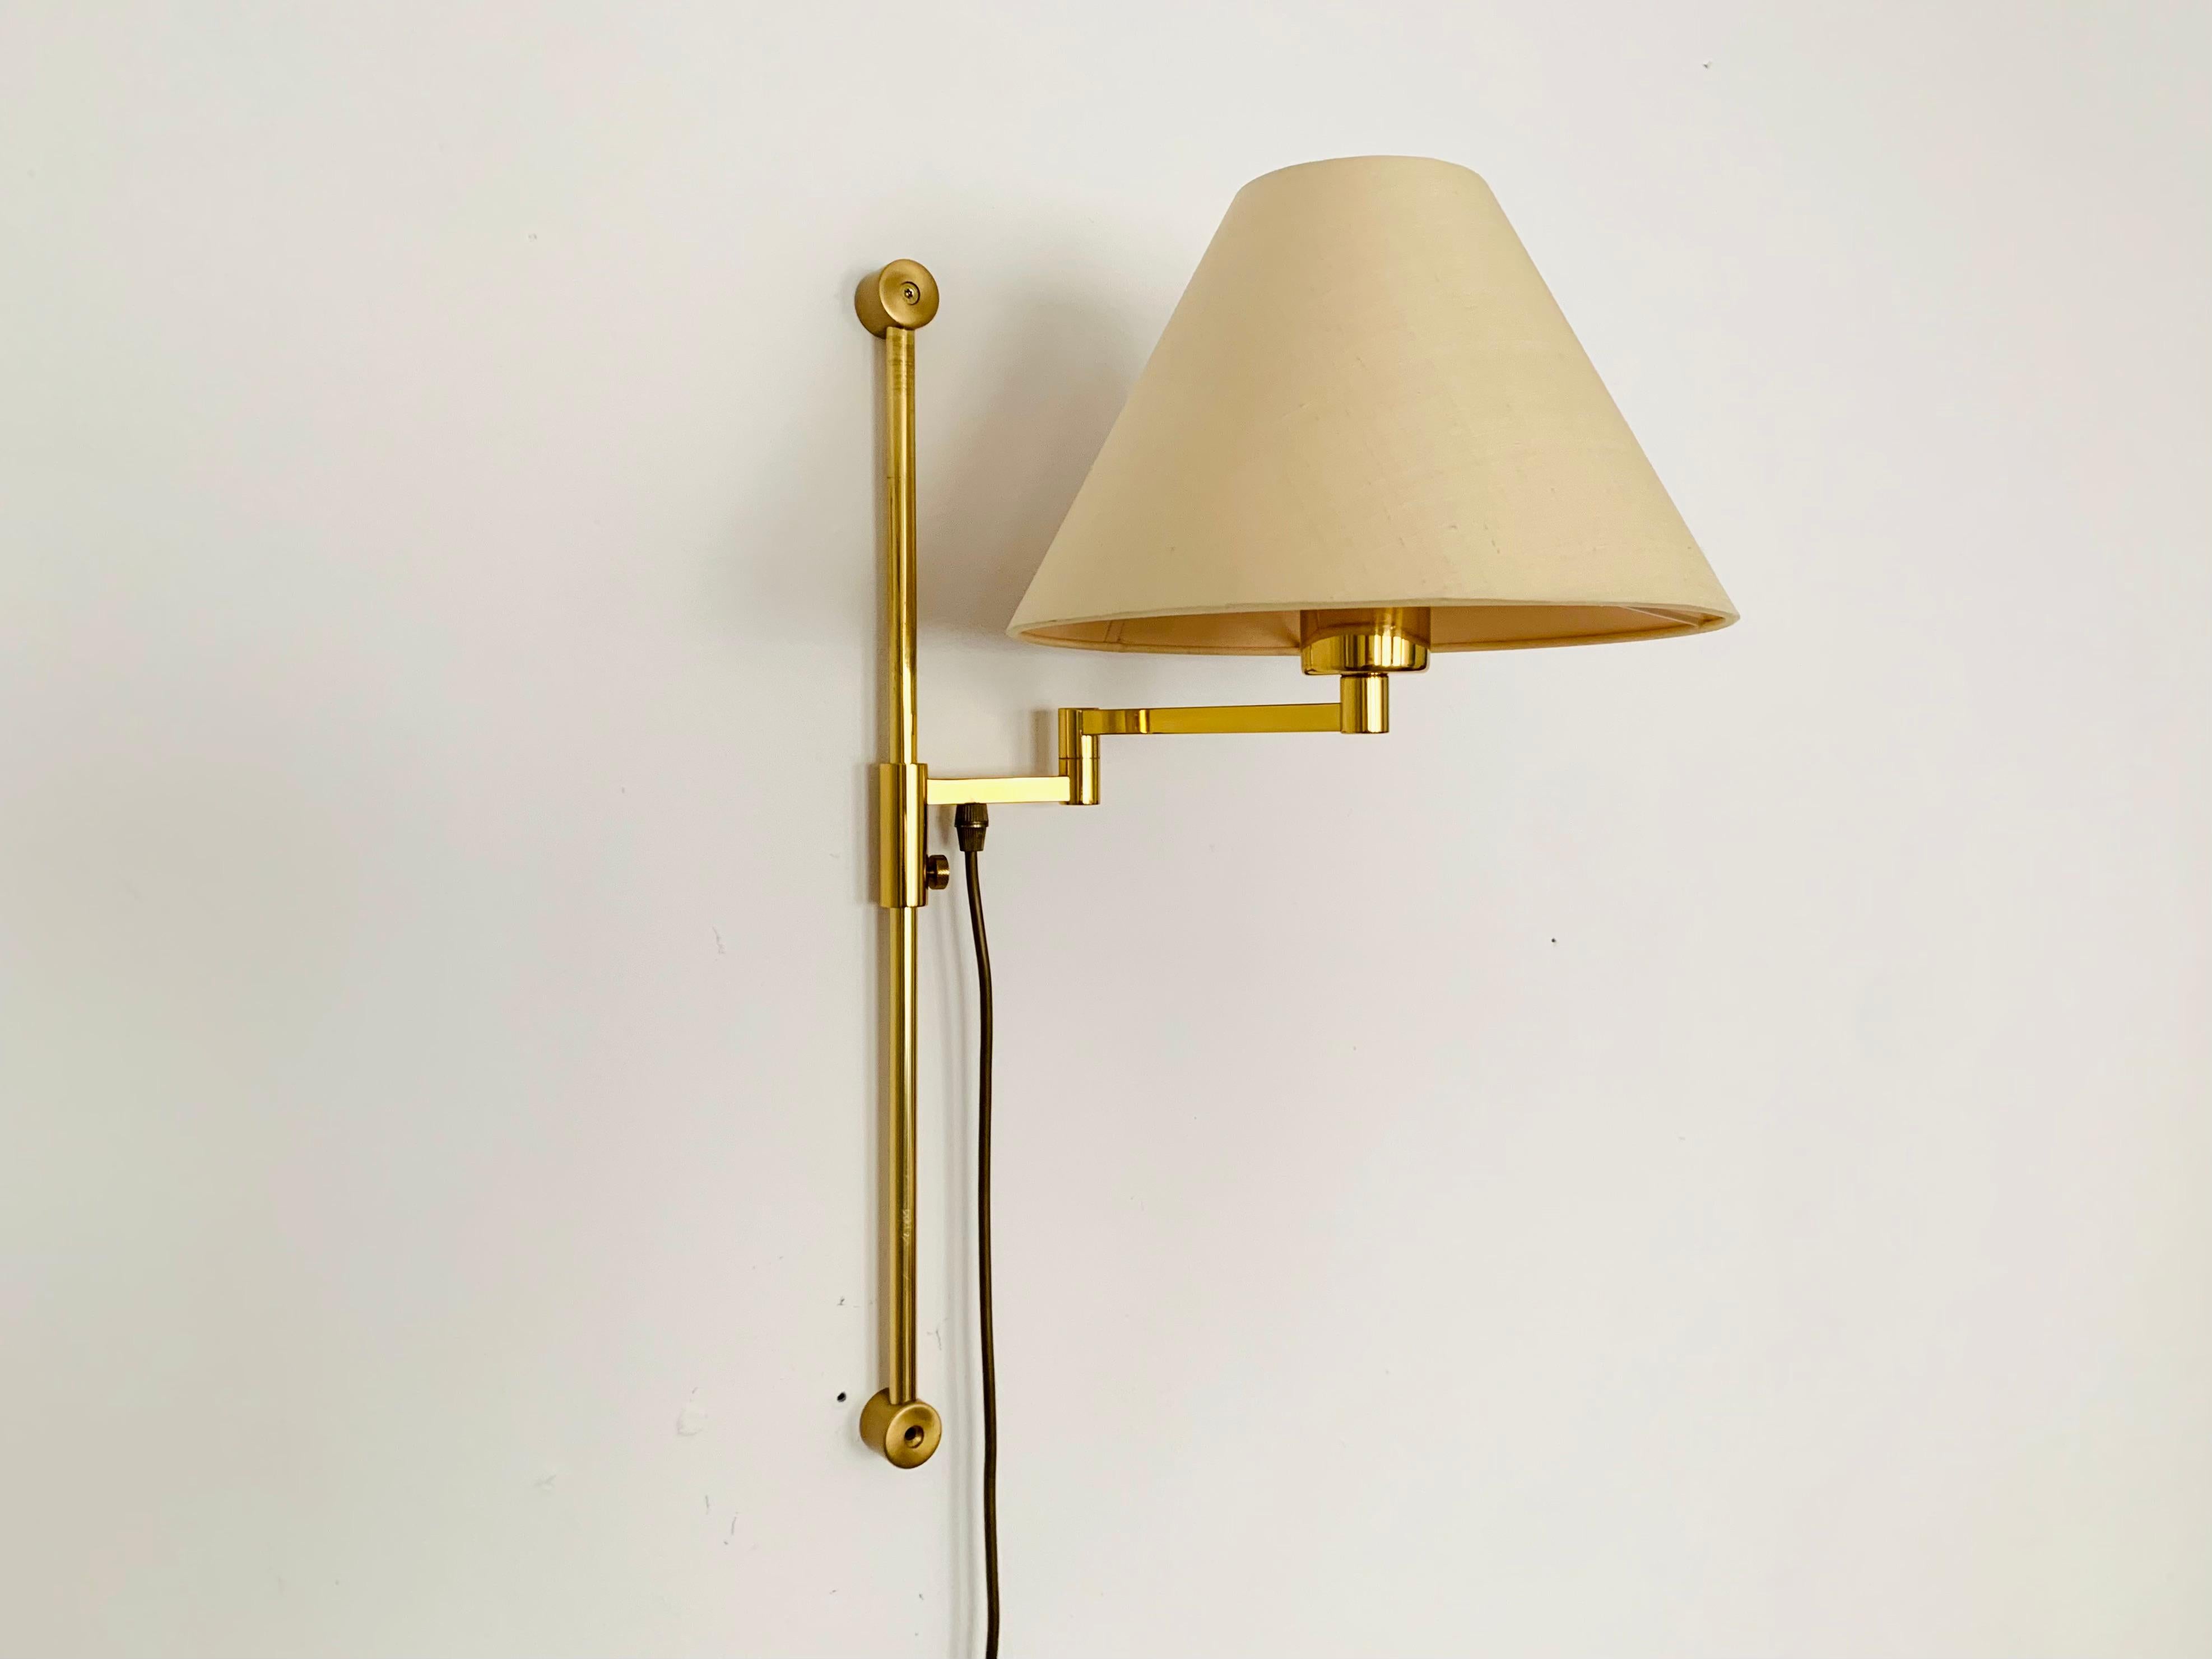 Very nice adjustable brass wall lamp from the 1960s.
The lighting effect of the lamp is extremely beautiful because the lampshade creates a very warm atmosphere.

Condition:

Very good vintage condition with slight signs of wear consistent with